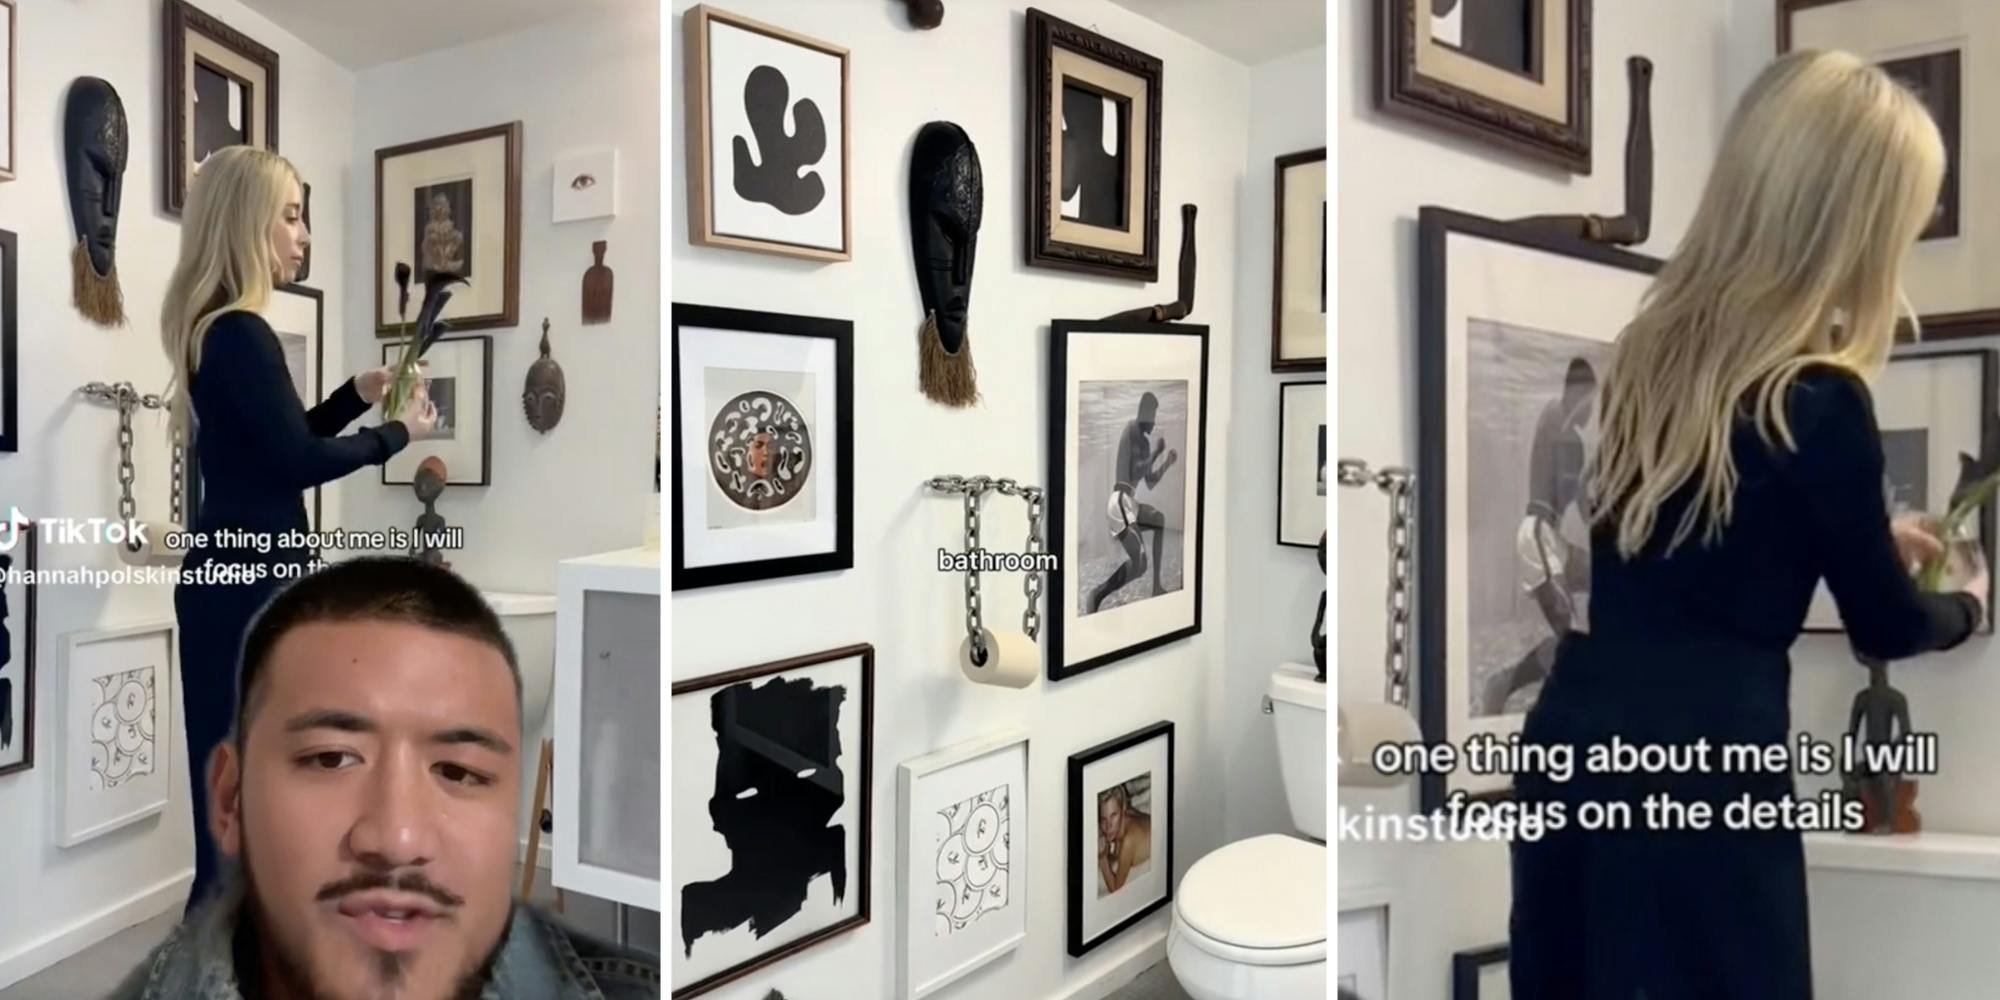 'This can't be real': Artist called out for slavery-themed bathroom